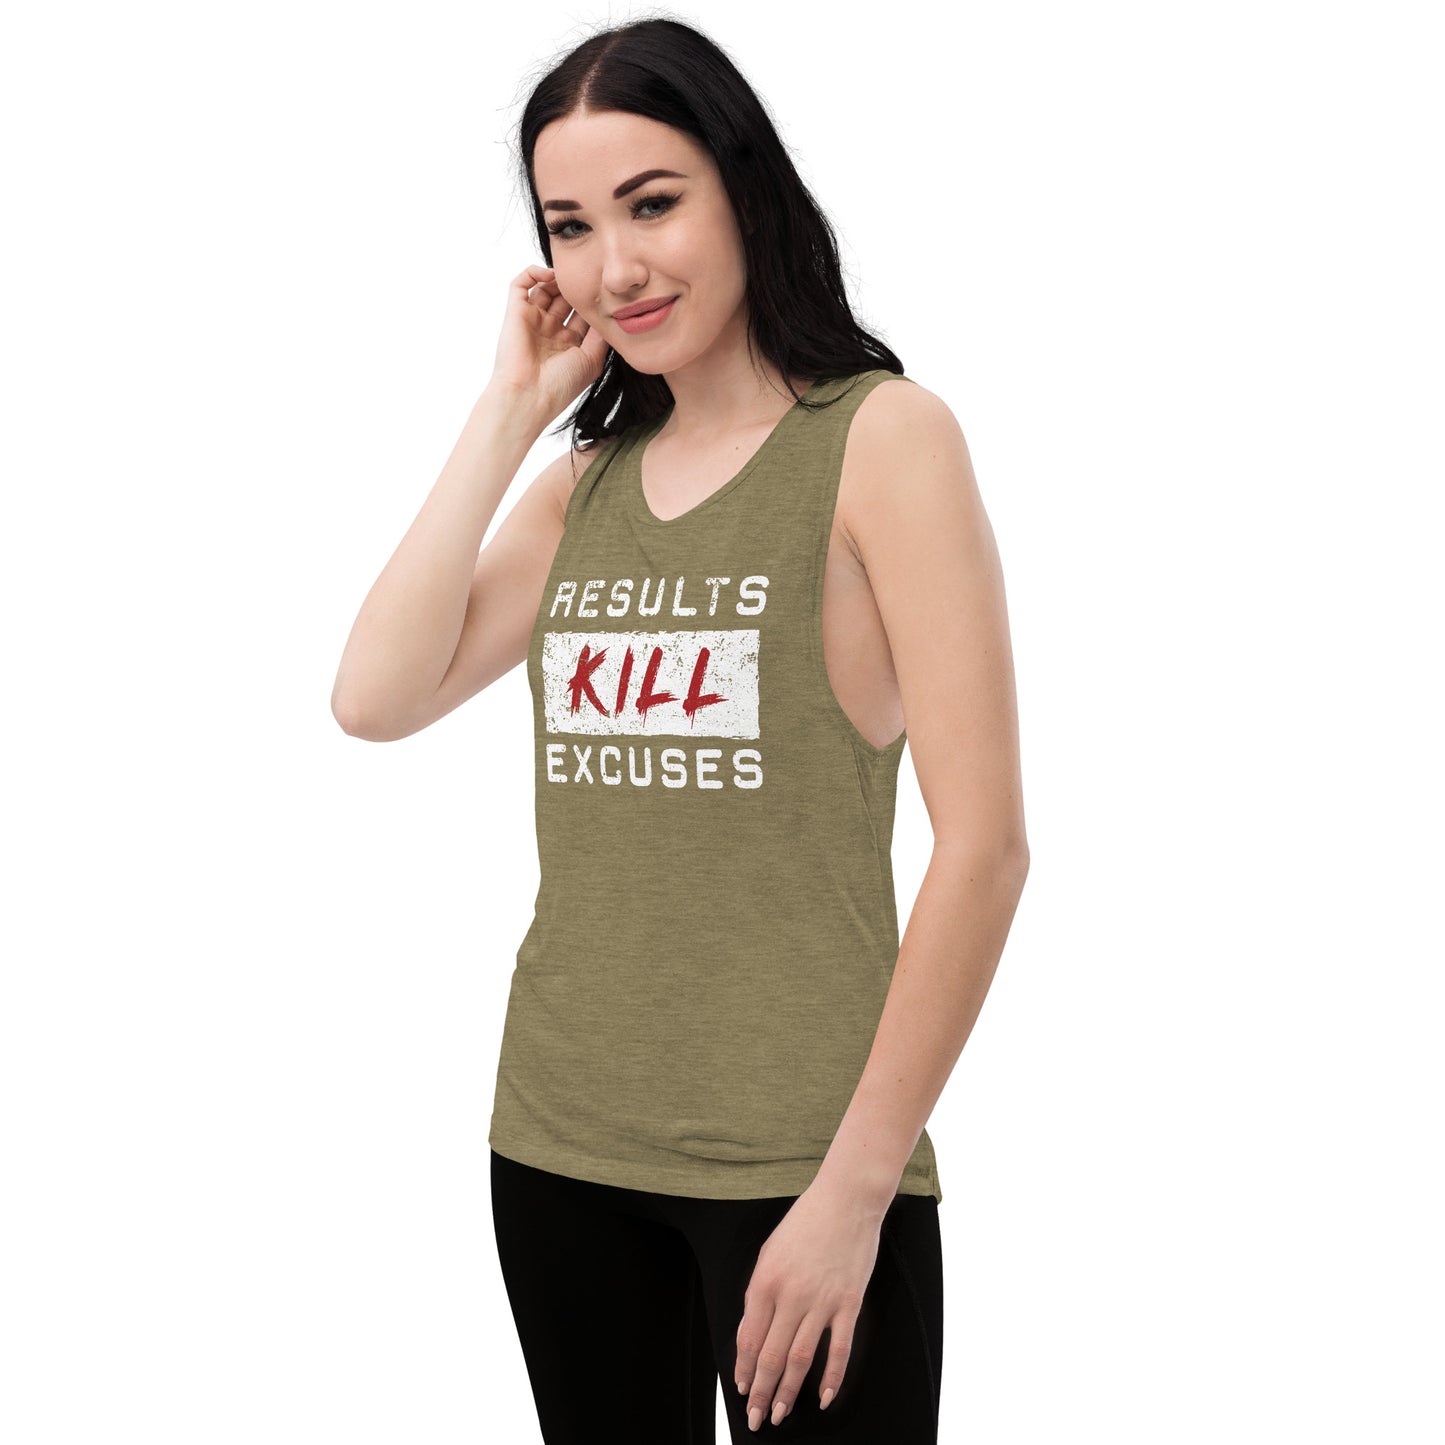 RESULTS KILL EXCUSES WOMENS Muscle Tank